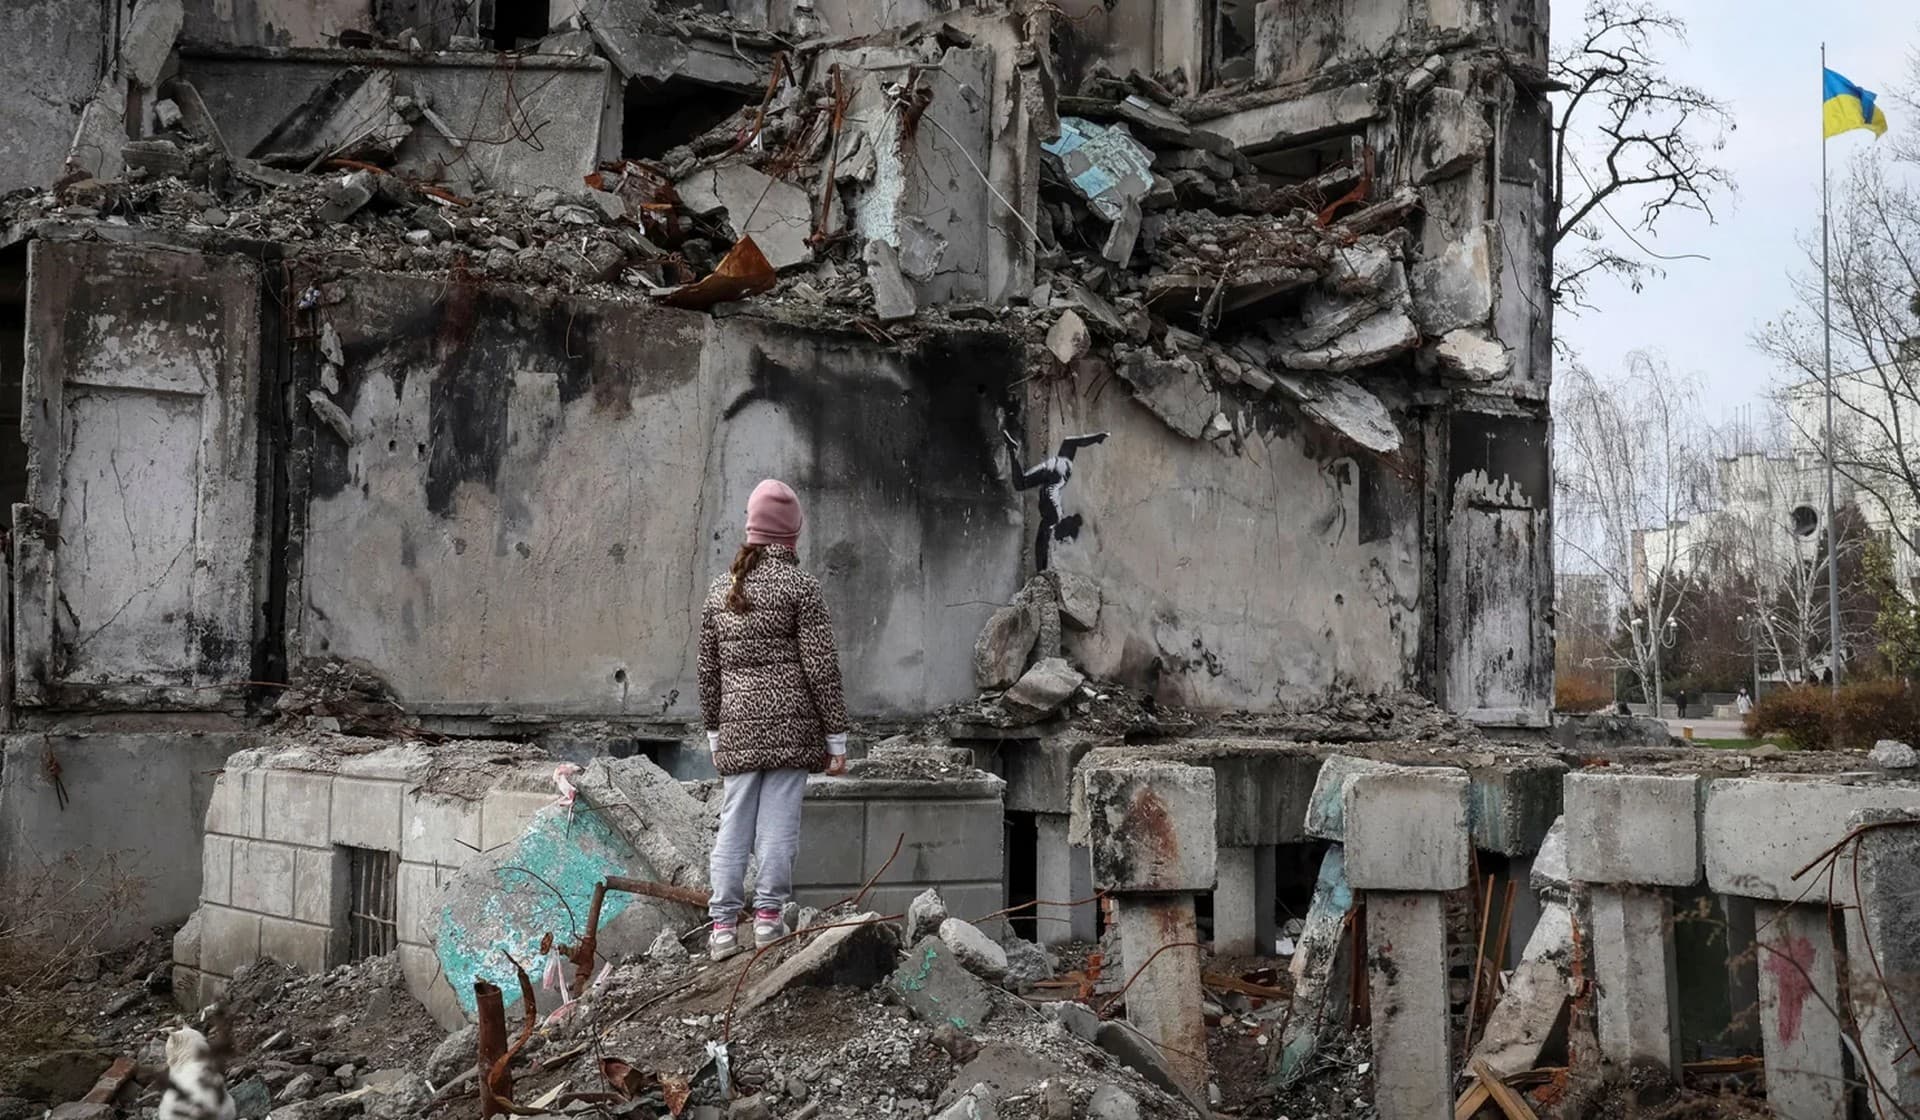 A work of graffiti artist Banksy at the wall of destroyed building in the town of Borodianka